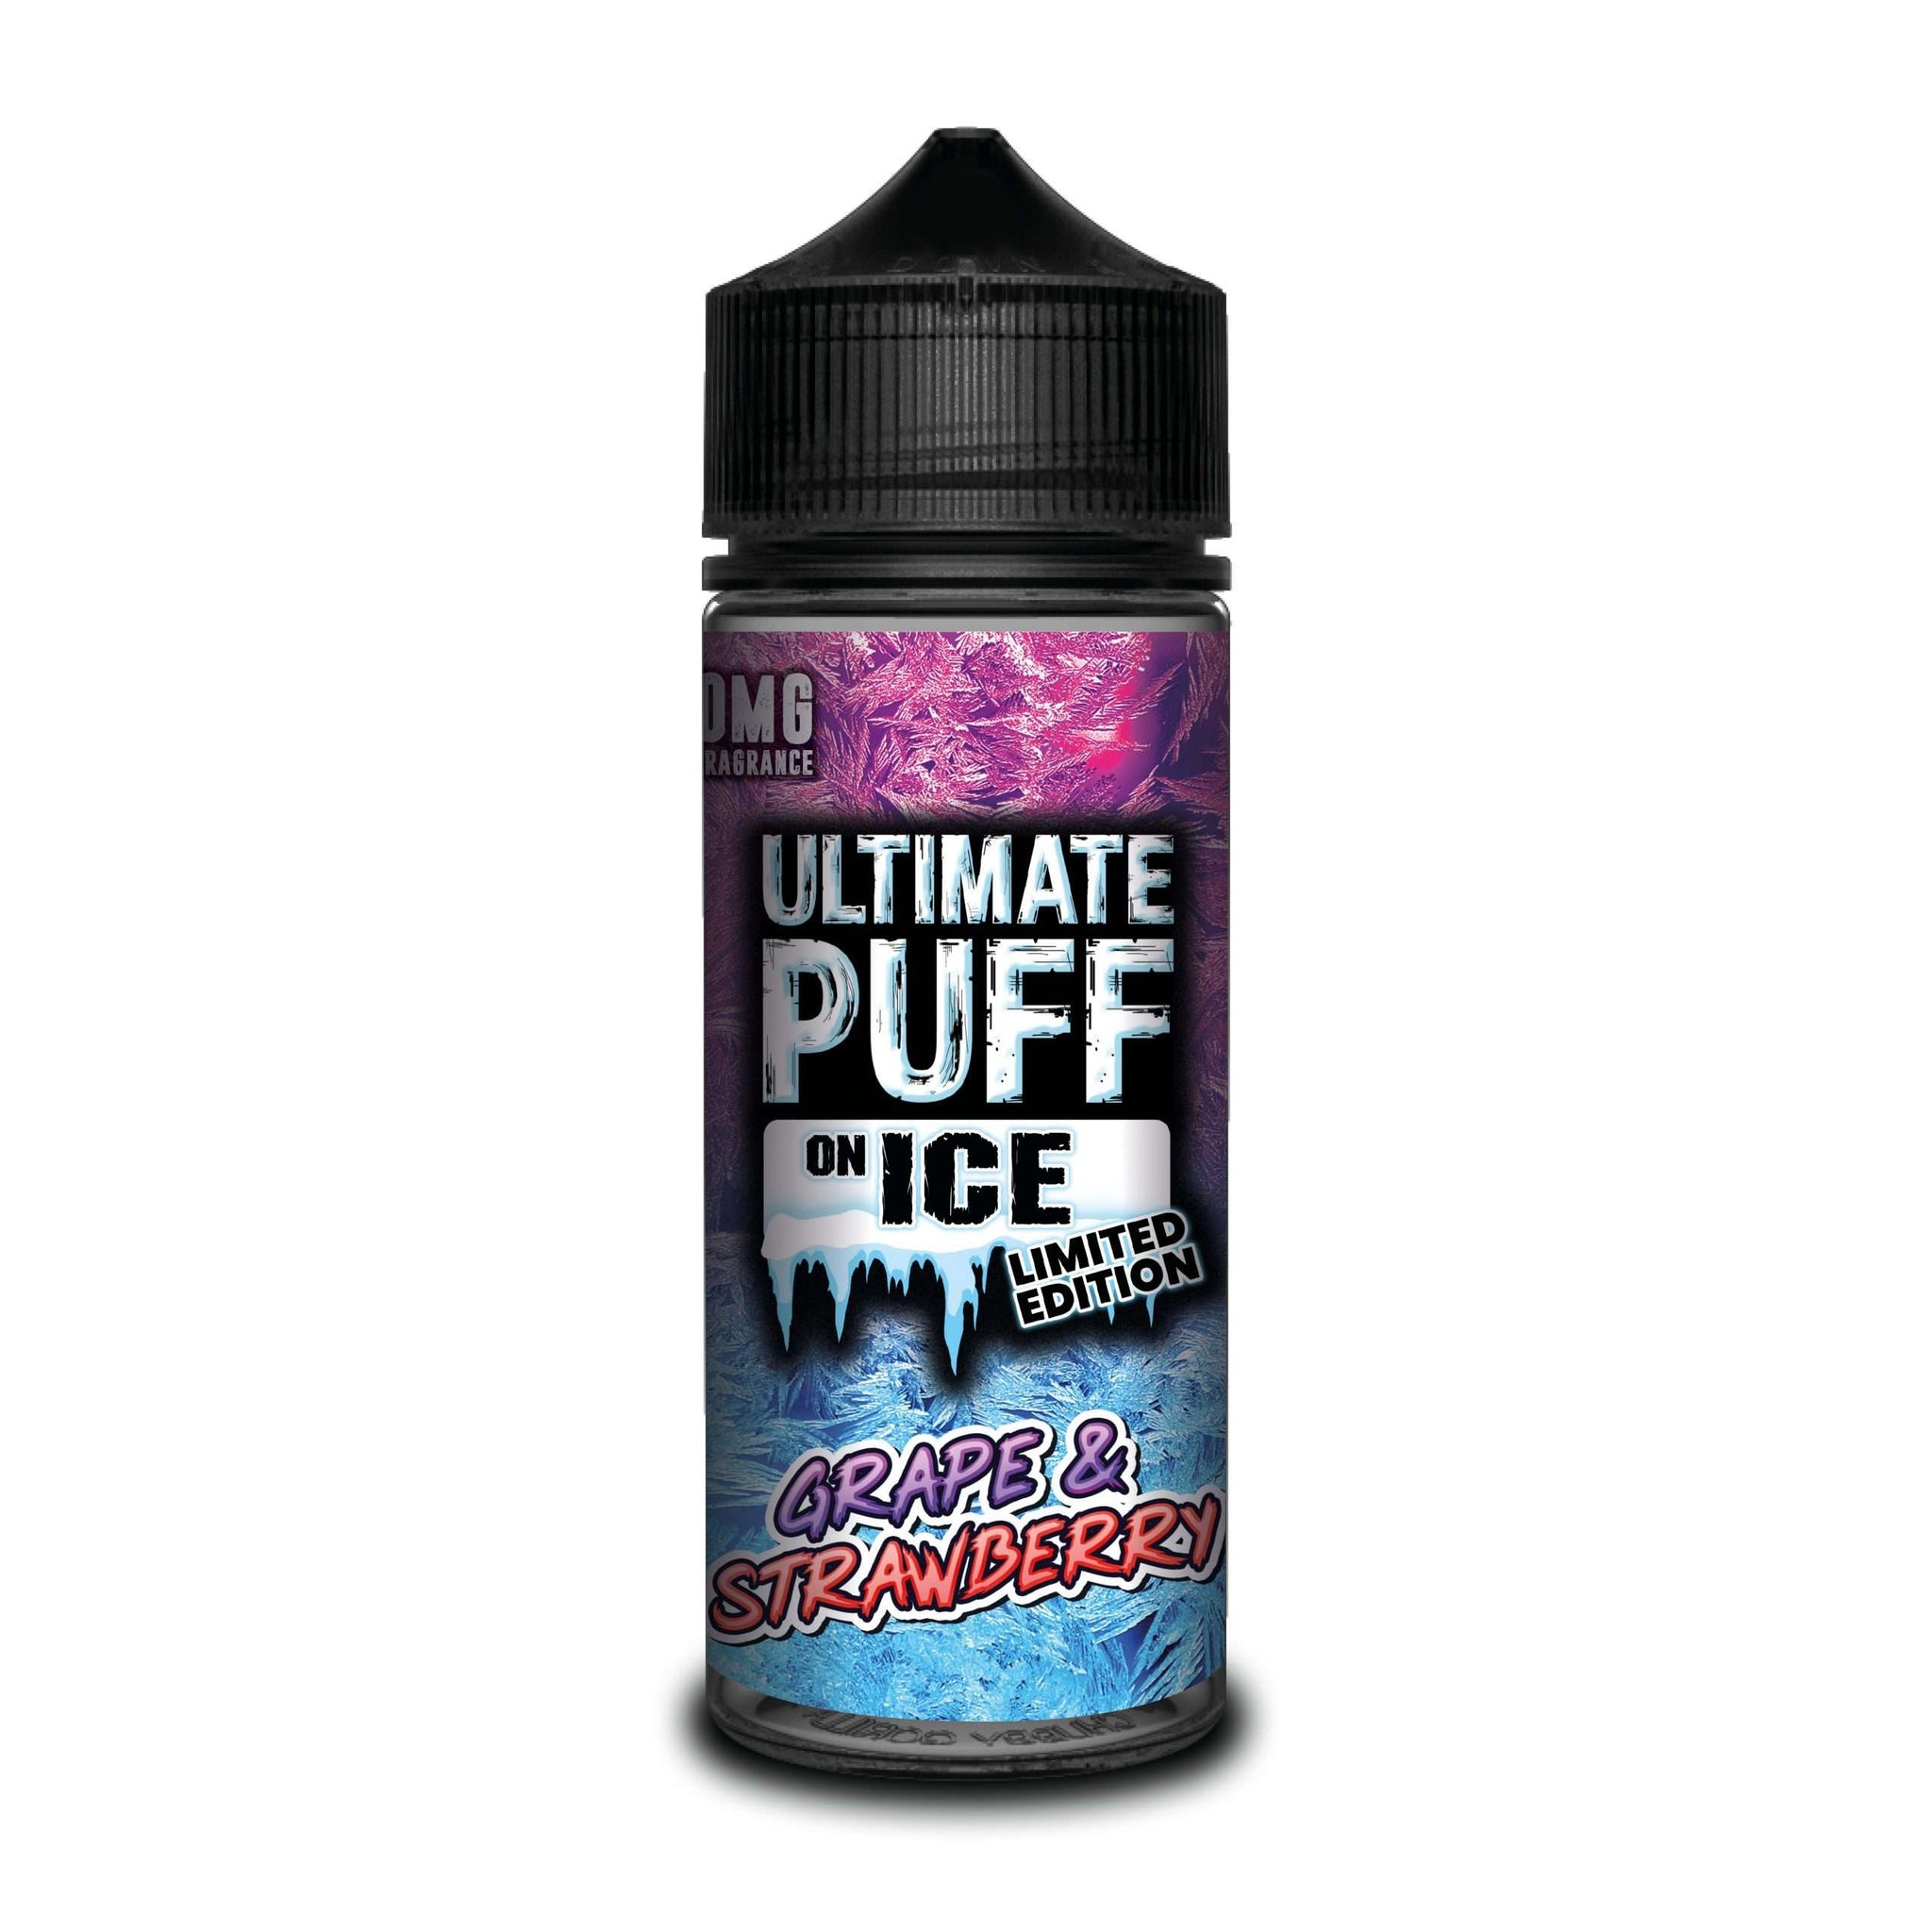 ULTIMATE PUFF ON ICE - GRAPE AND STRAWBERRY